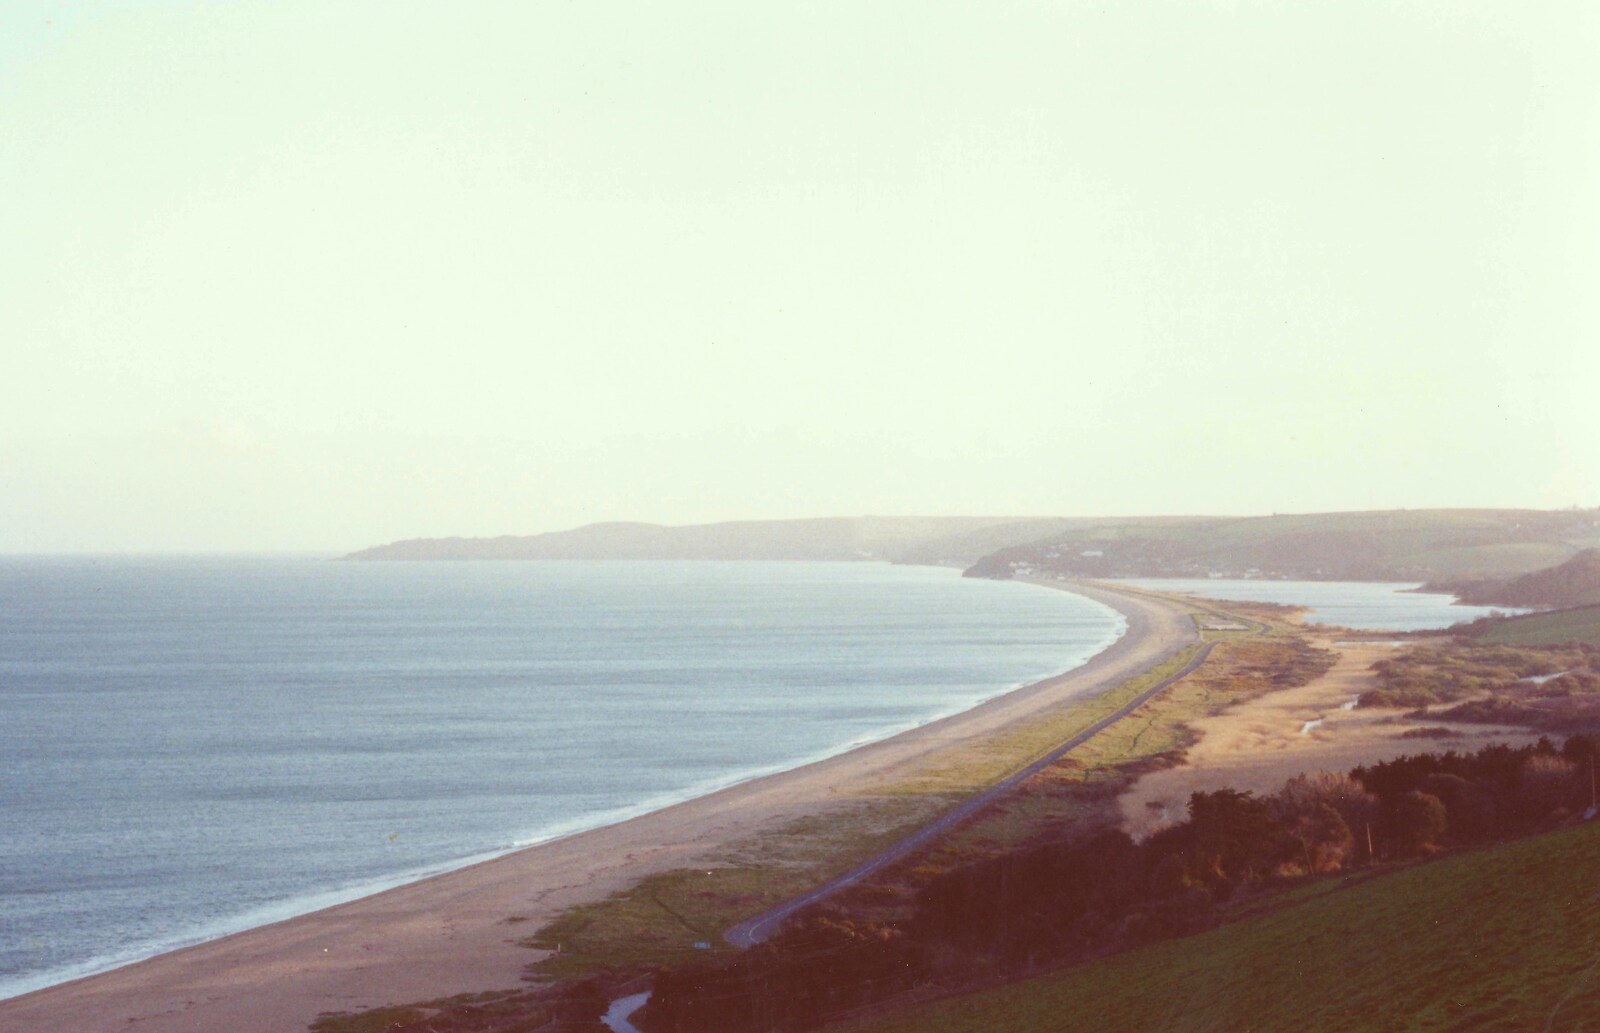 Slapton Beach and the Ley from up in the hills from Uni: Dartmoor Night and Day, Dartmouth and a bit of Jiu Jitsu, Devon - 29th April 1989